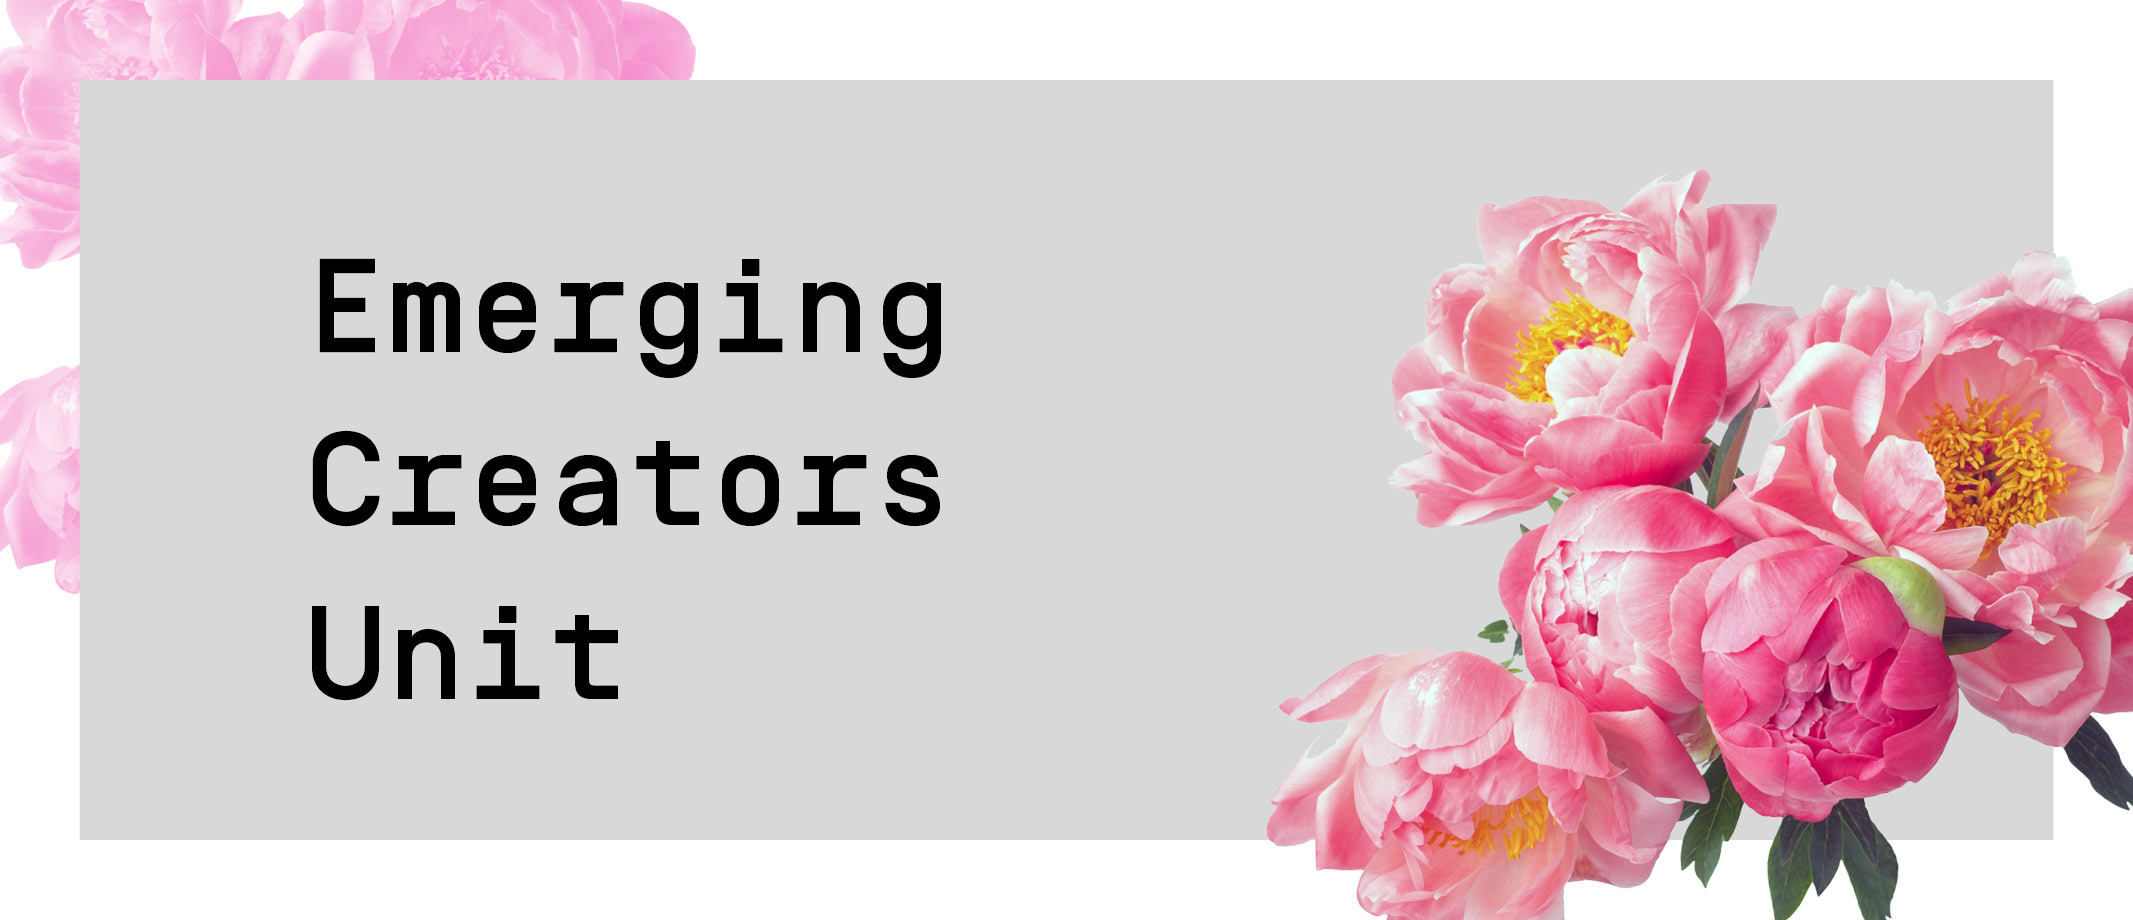 Black text on a grey background reads Emerging Creators Unit. To the left and right are pink peonies.